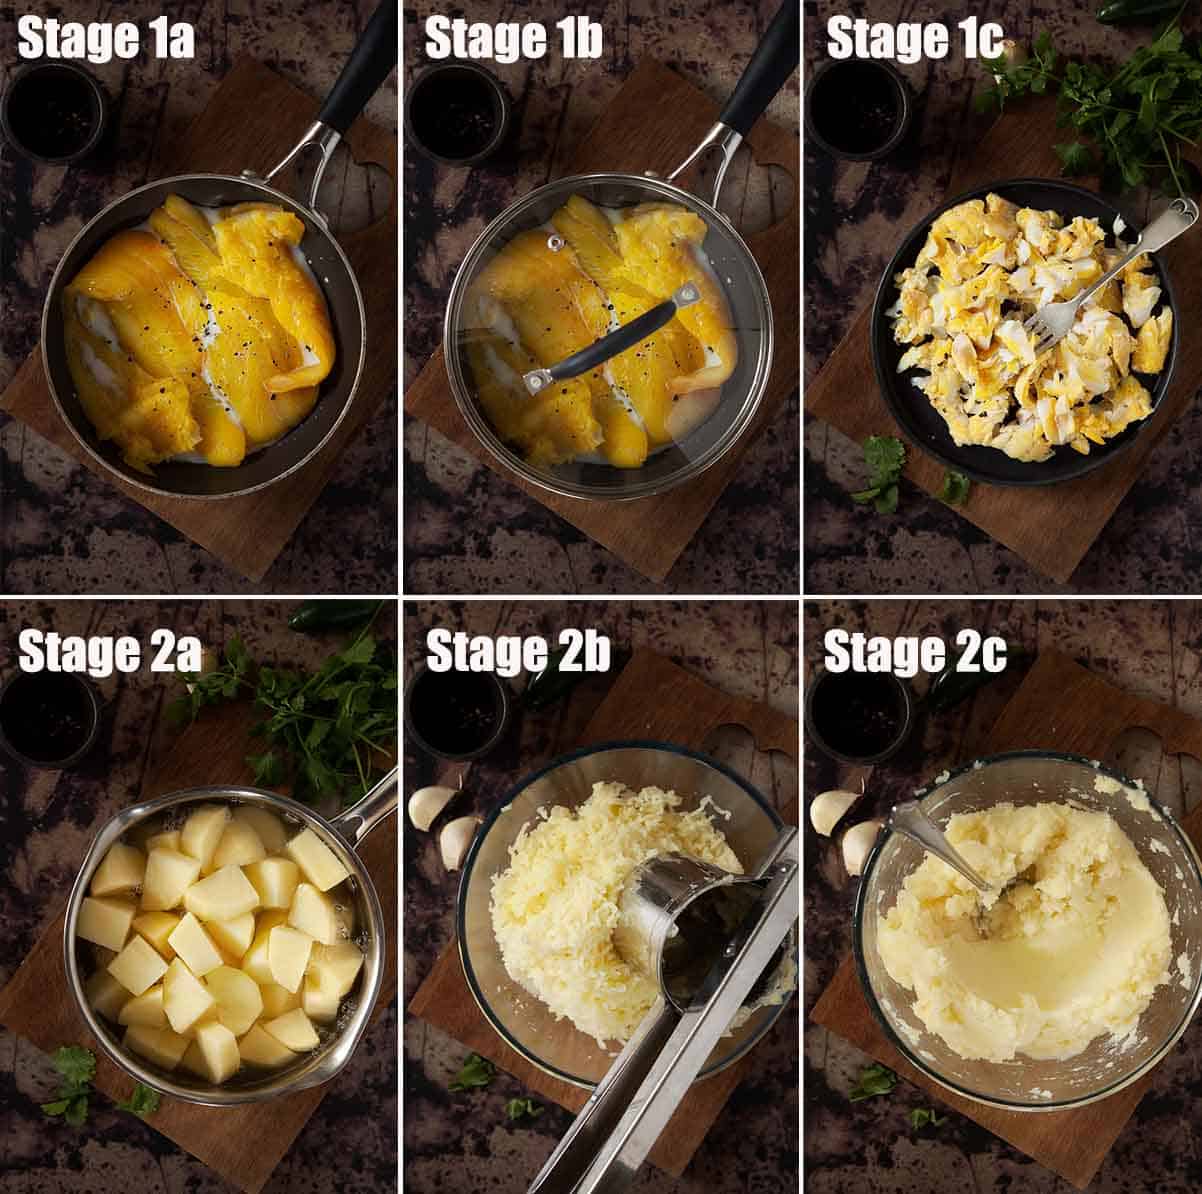 Collage of images showing fish and mashed potatoes being prepared.